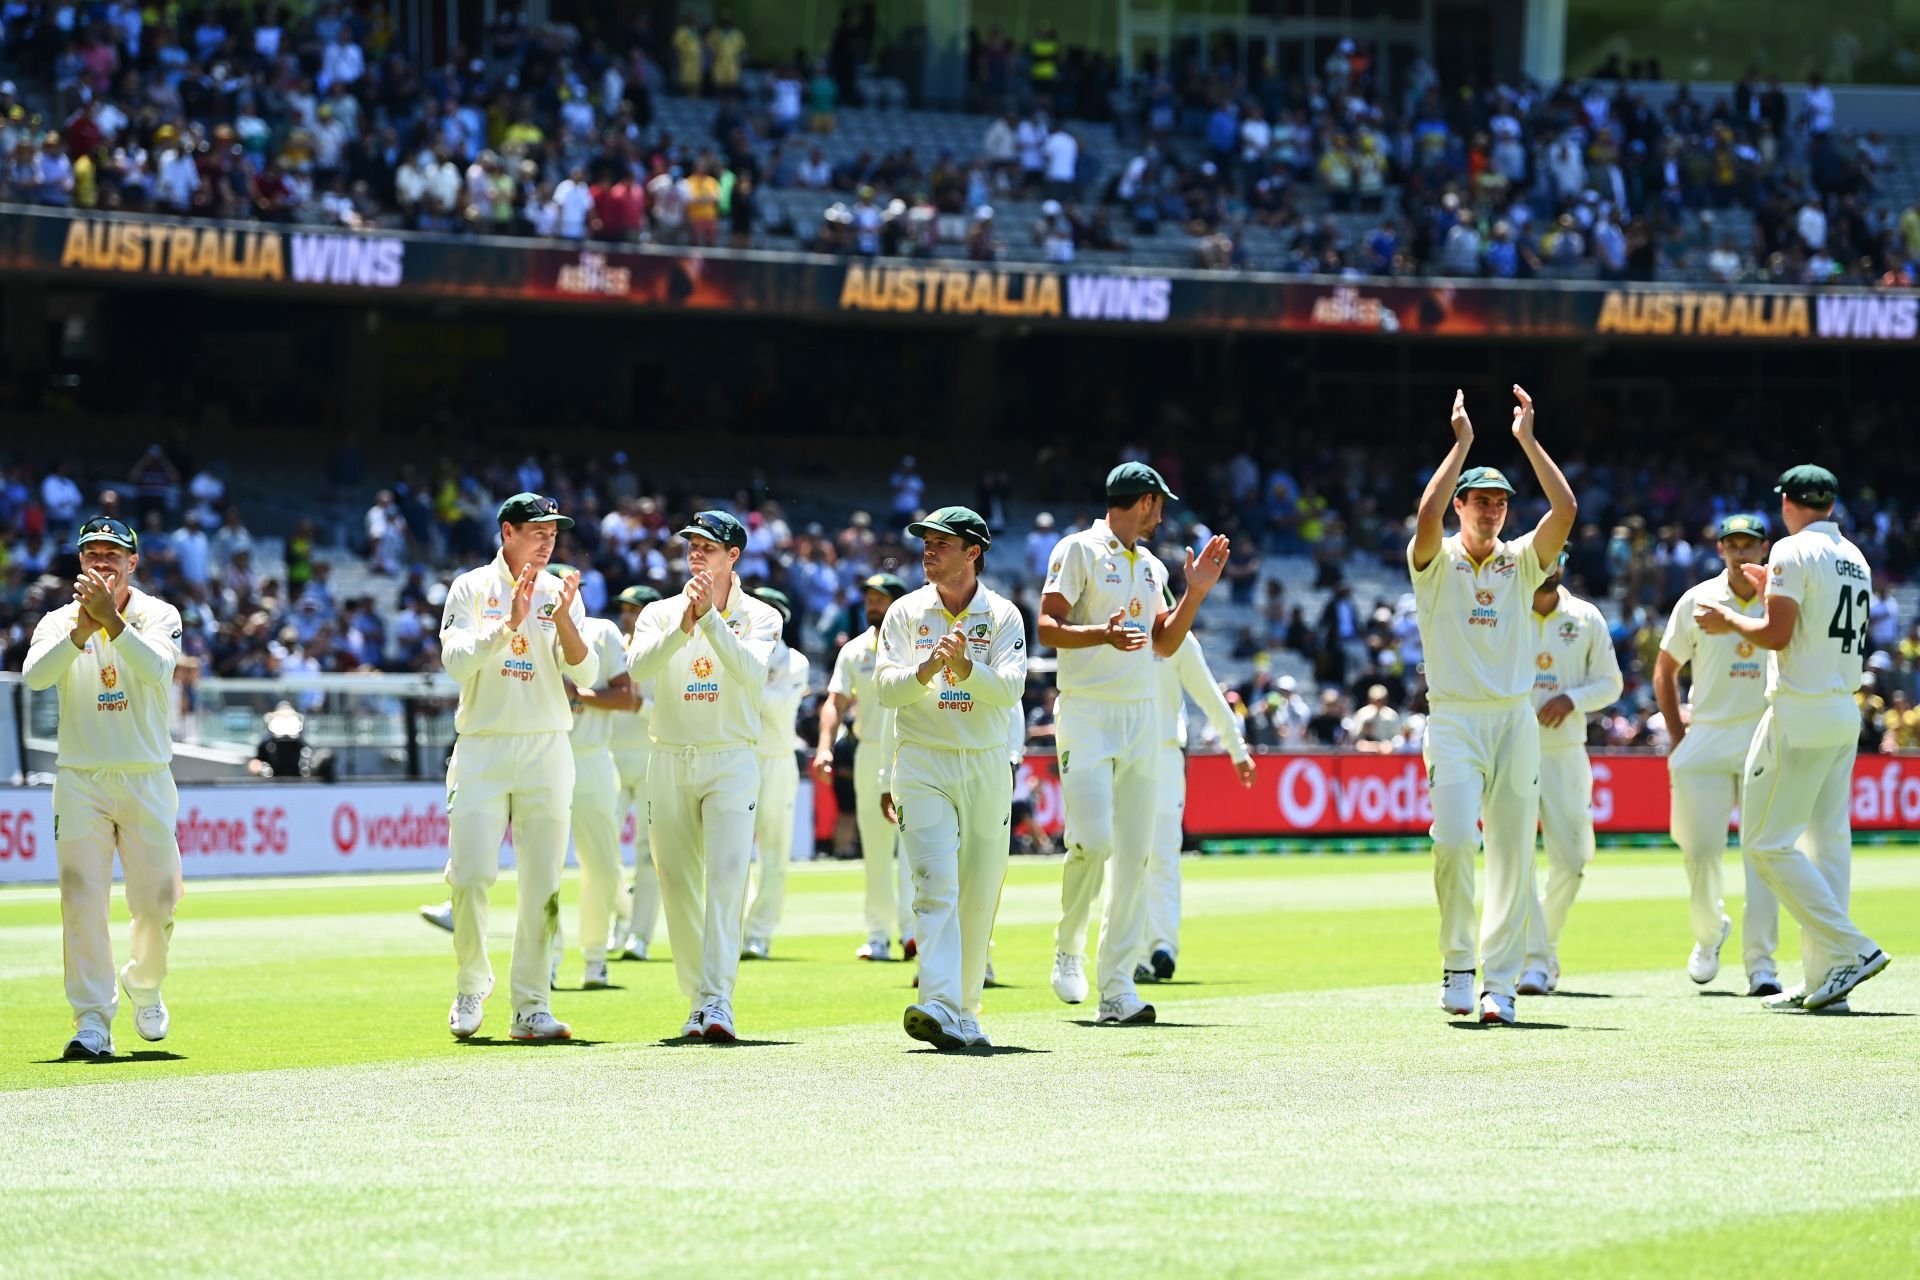 Australia retained the Ashes by taking a 3-0 lead in the ICC World Test Championship series against England